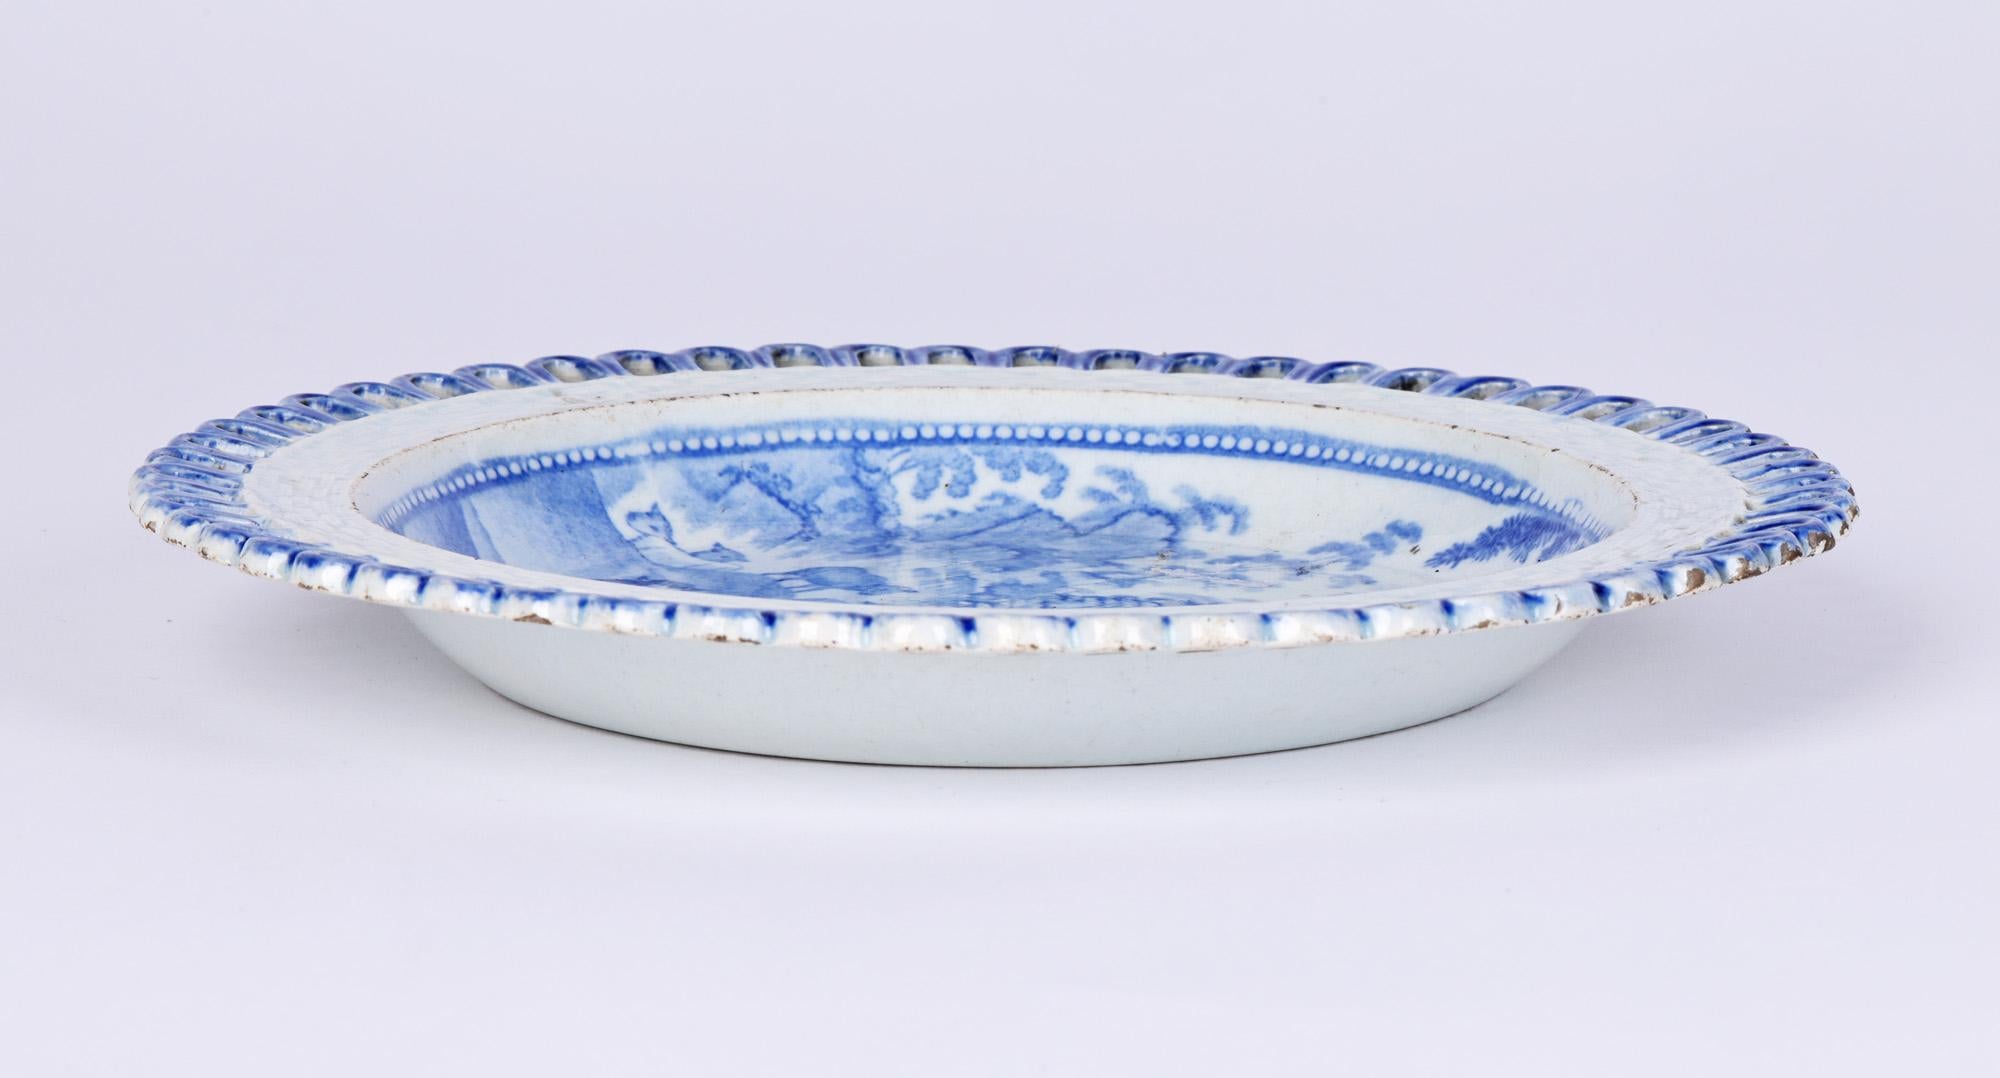 A very fine antique English Staffordshire pearlware blue and white plate decorated with a shepherd with his sheep dating from around 1820. The lightly potted plate is of round shape with a raised edge with a flat rim applied with openwork loops